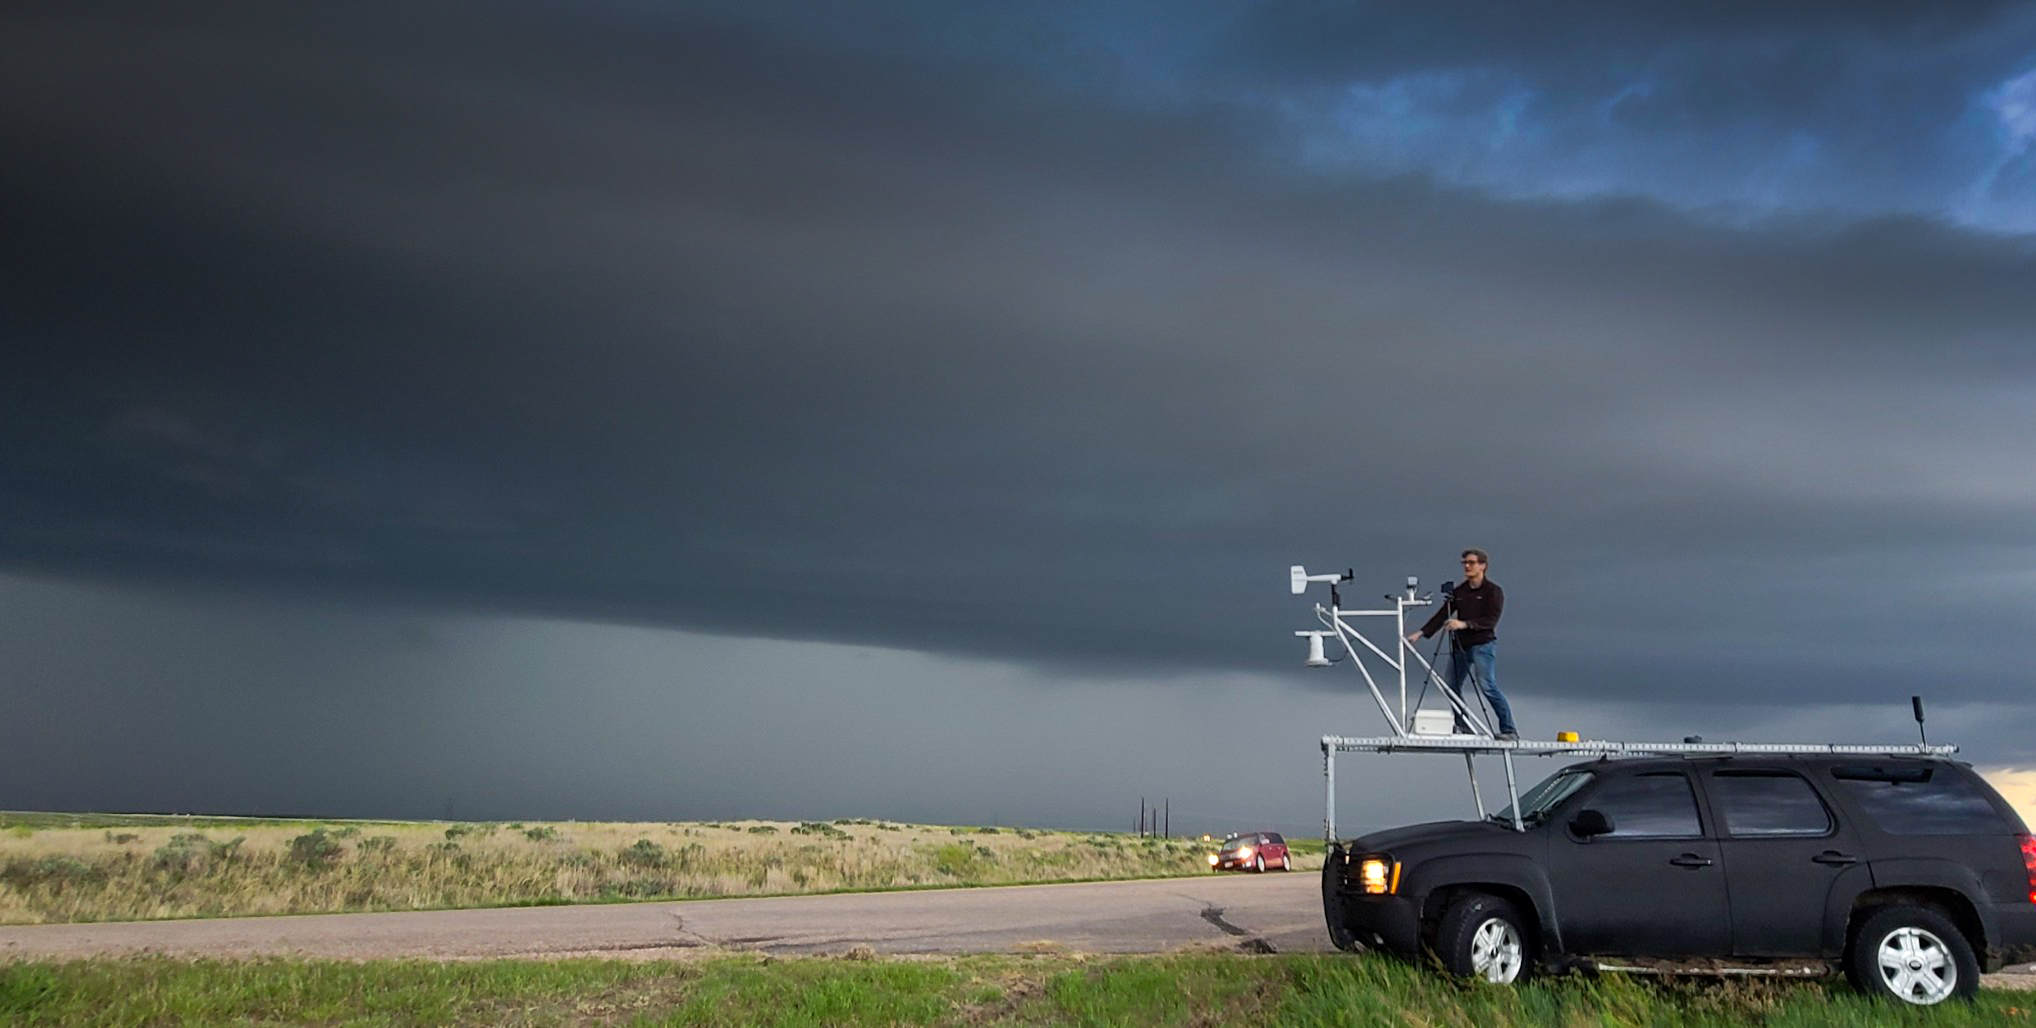 TJ Corrigan atop car with storm chasing equipment